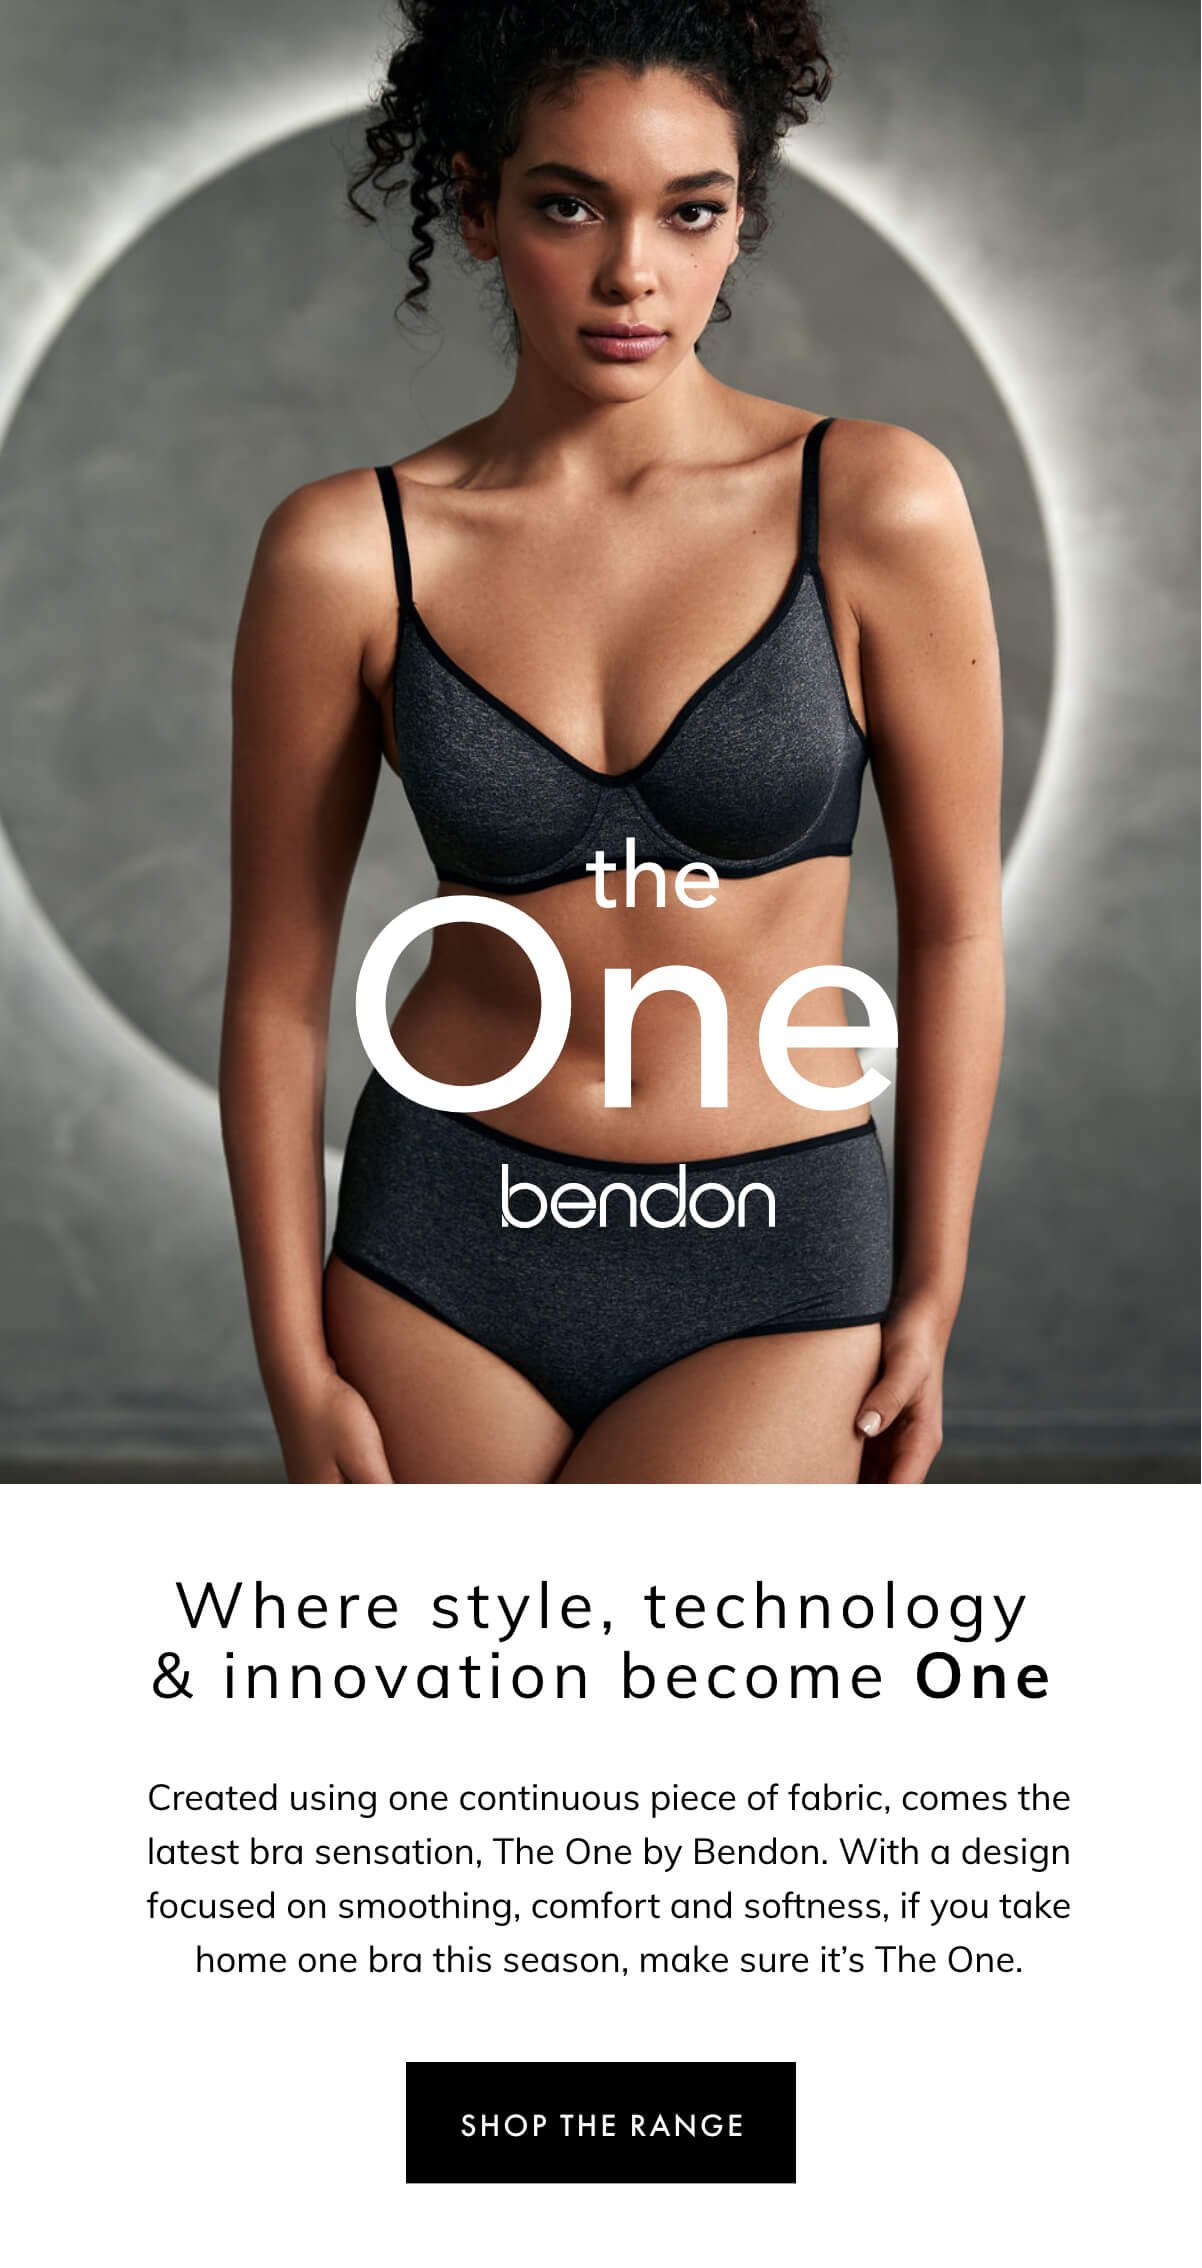 Bendon Lingerie AU: Introducing: The One by Bendon